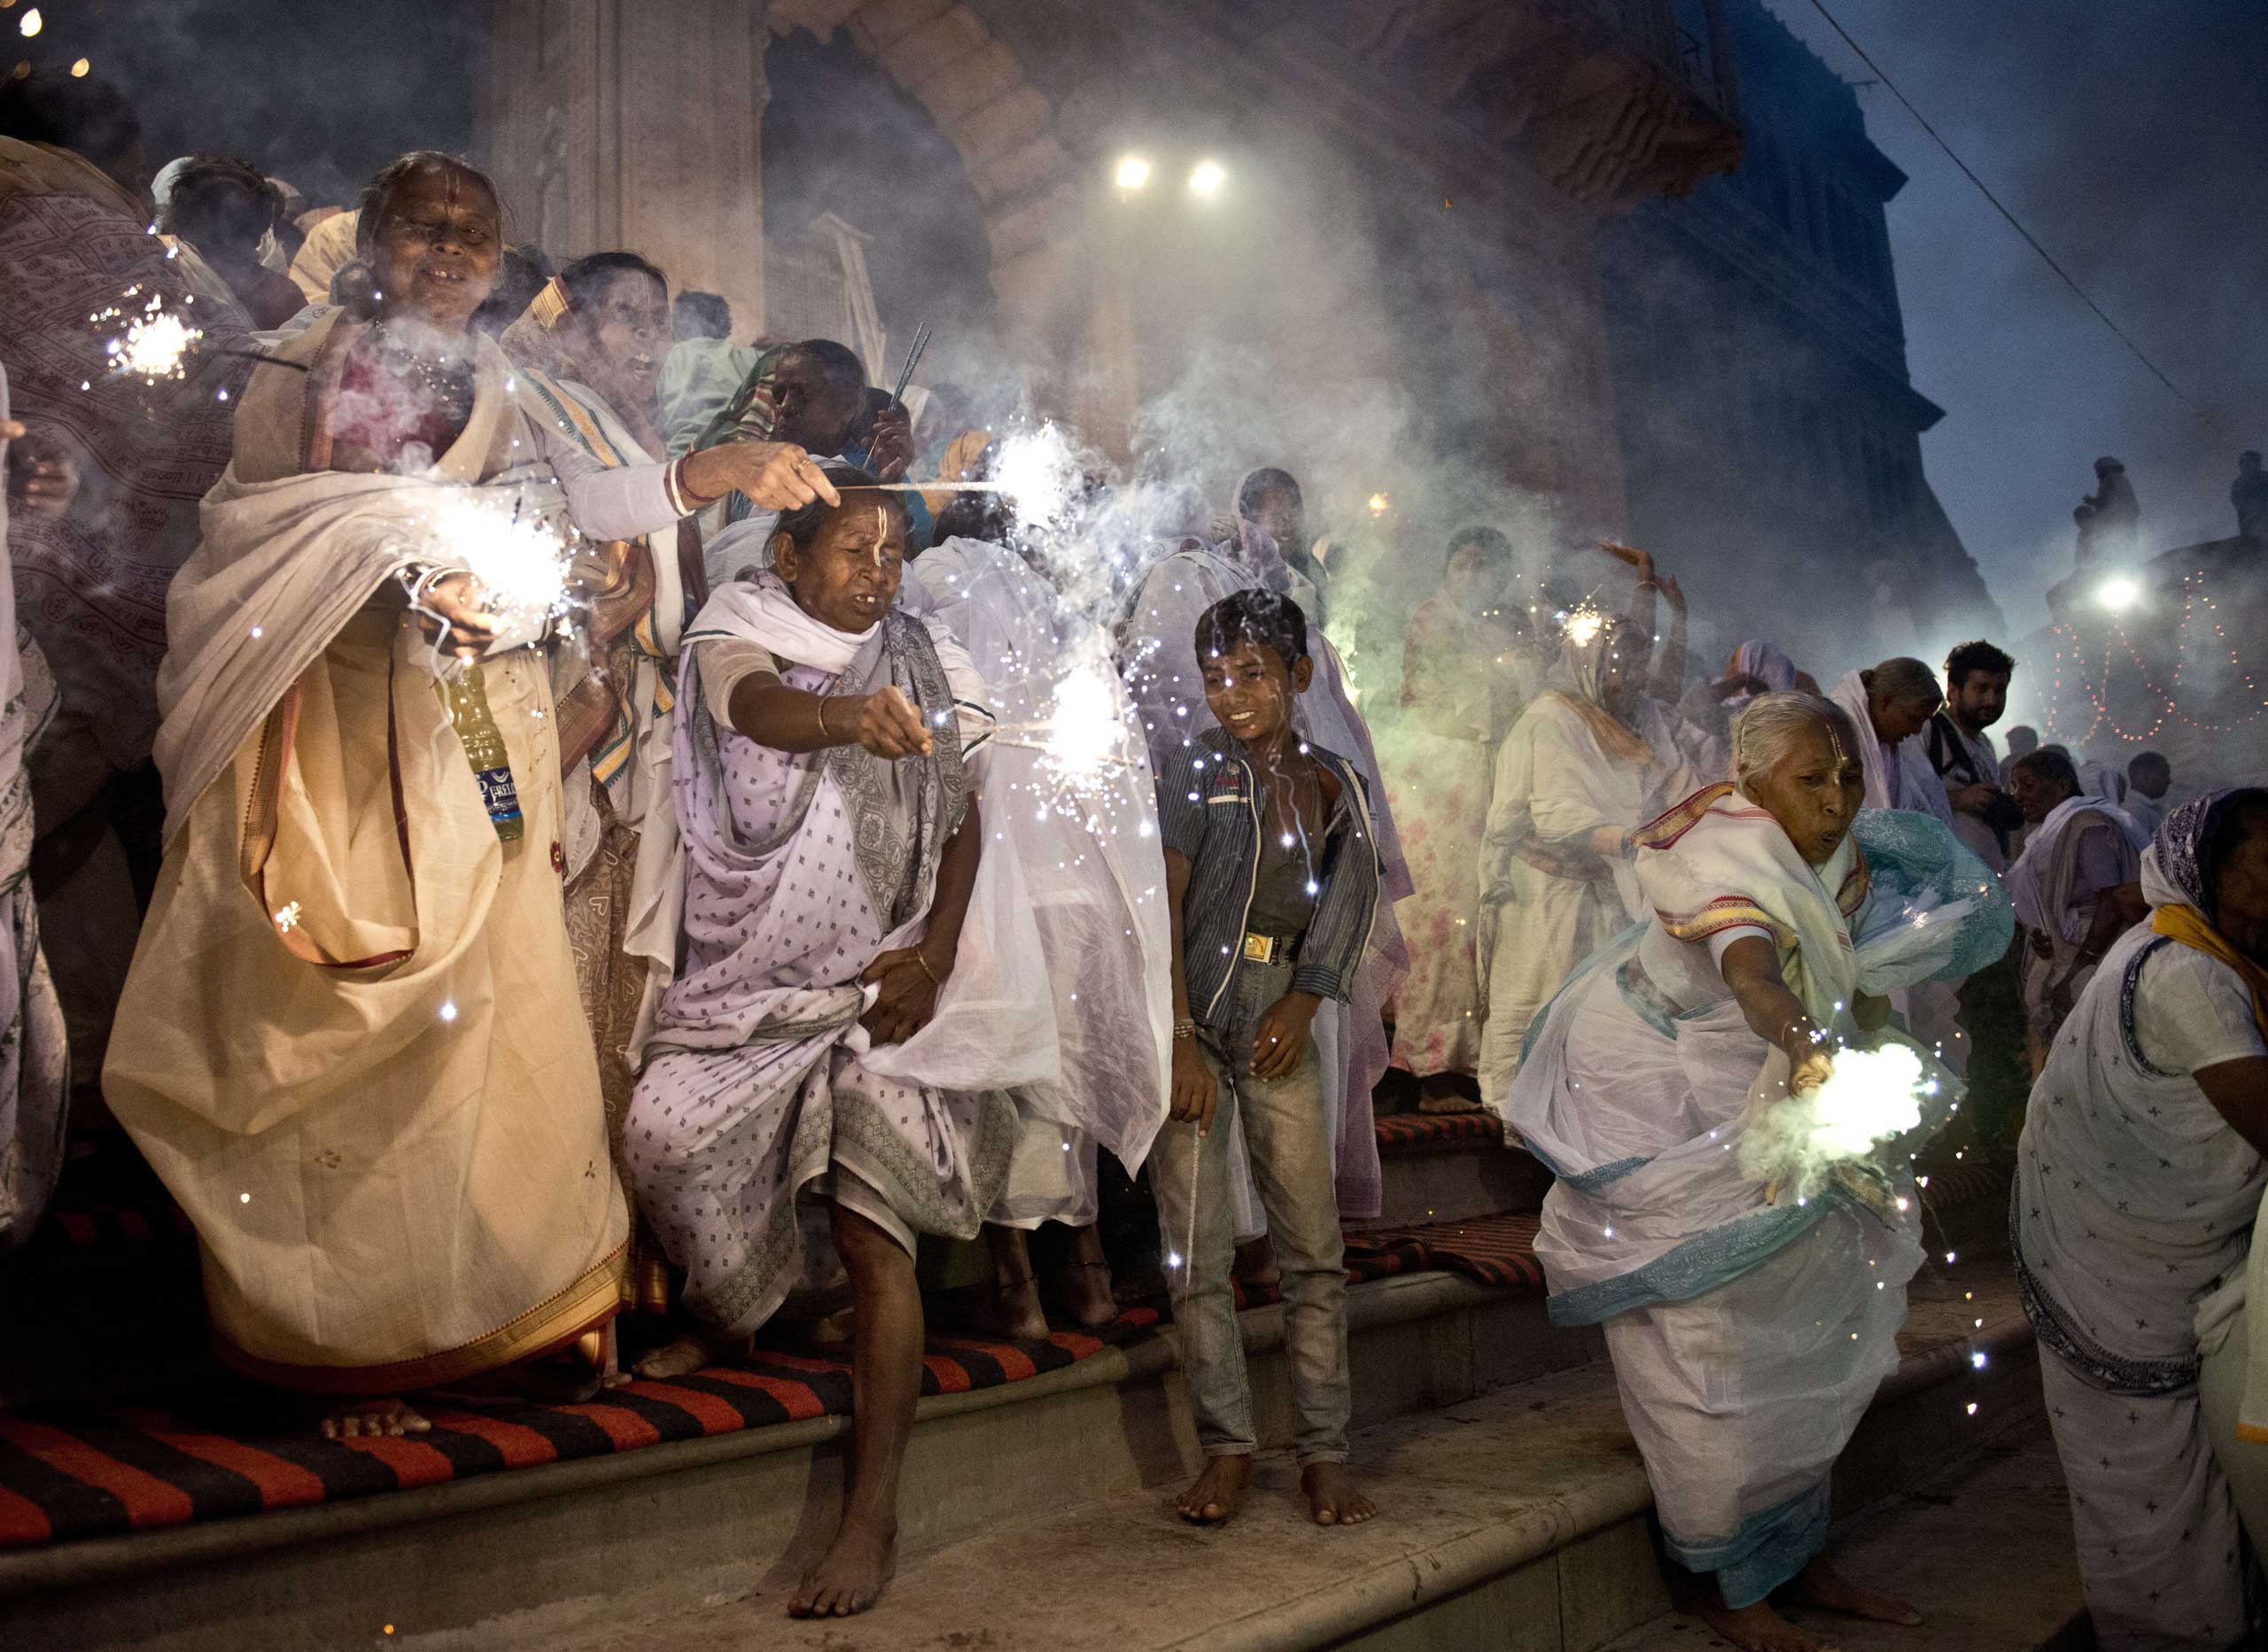 Oct. 21, 2014. Indian widows wave sparklers as they participate in a celebration for the Hindu festival Diwali on the banks of the Yamuna river in the northern city of Vrindavan.